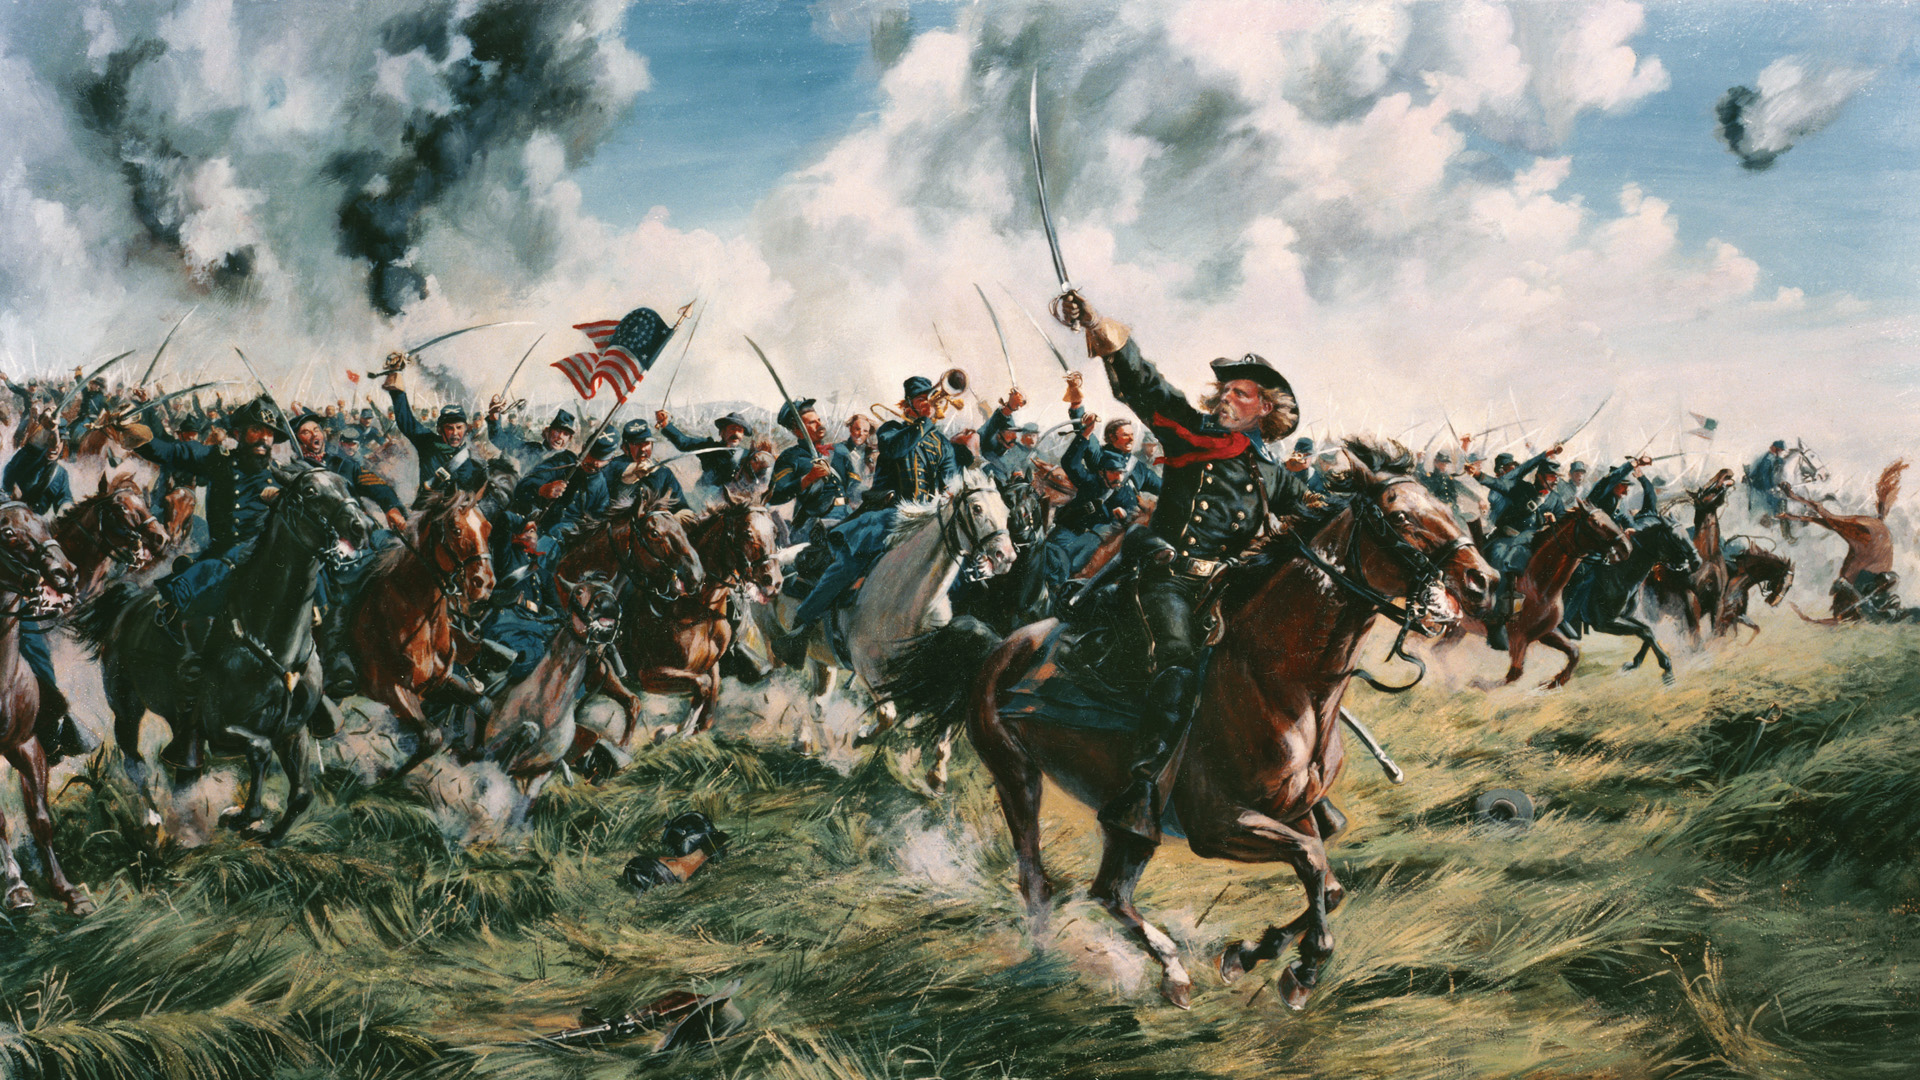 George Armstrong Custer, sporting his trademark red necktie, exhorts, “Come on, you Wolverines!” in Don Troiani’s painting of the same name.  He and his Michigan brigade made their reputation at Gettysburg.